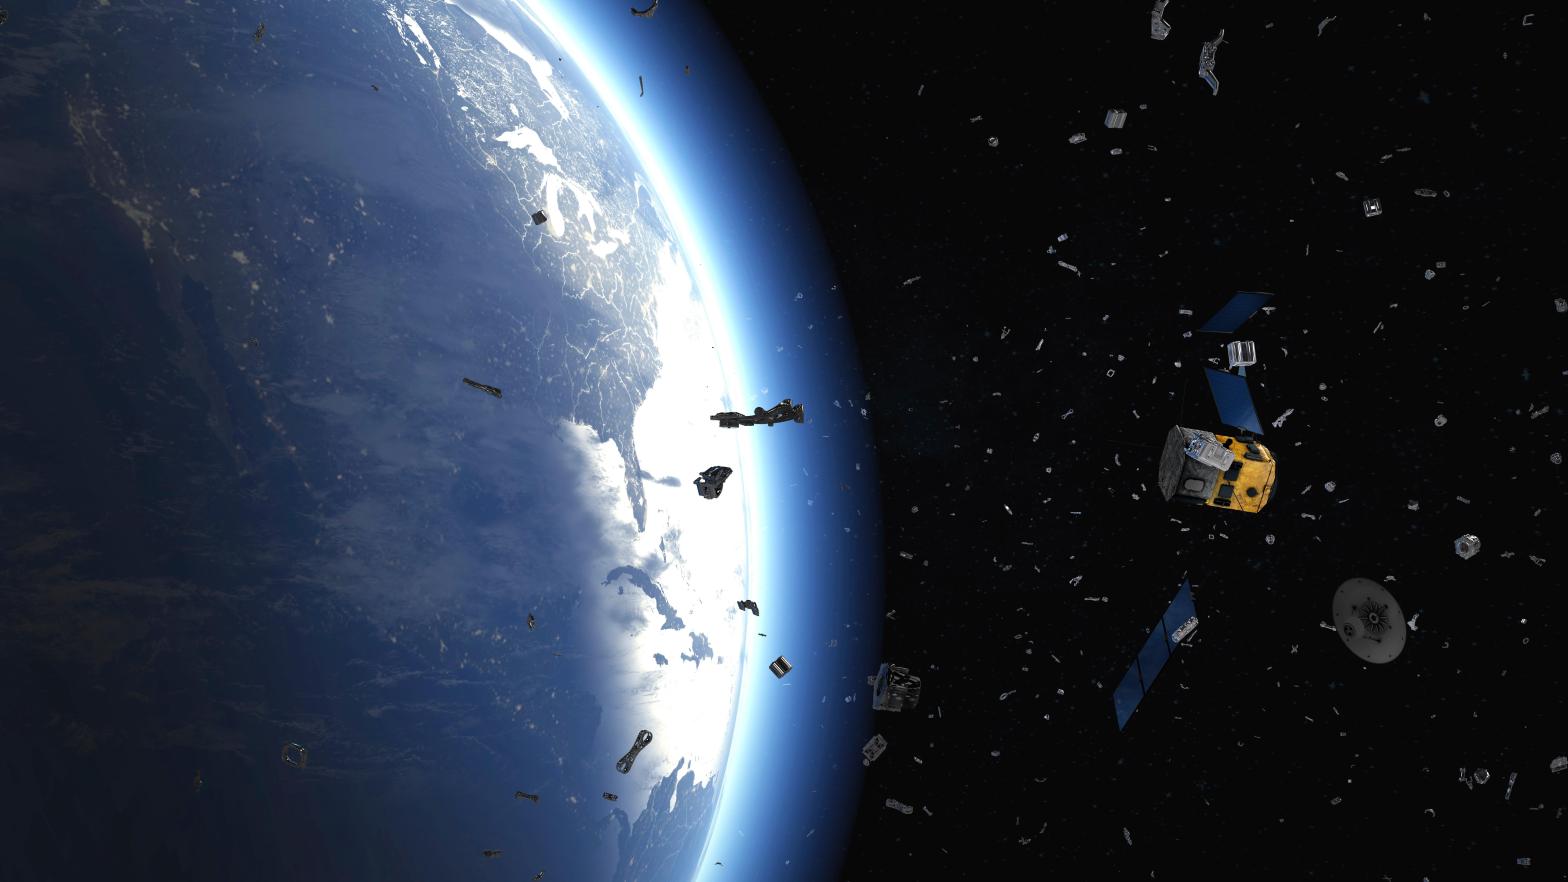 Artist's depiction of space debris orbiting Earth. (Illustration: Christoph Burgstedt/Science Photo Library, AP)